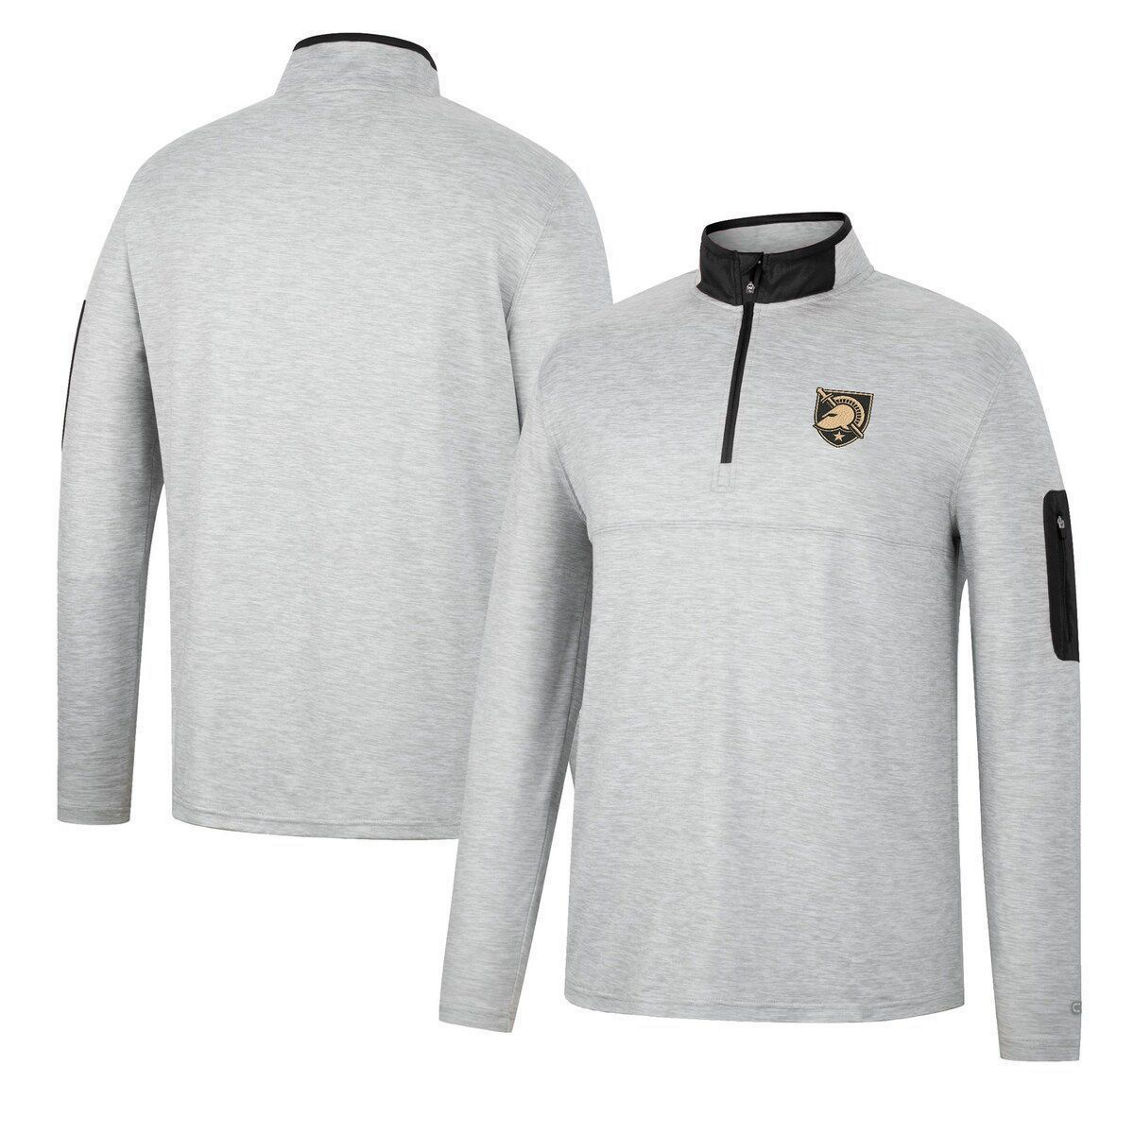 Colosseum Men's Heathered Gray/Black Army Black Knights Country Club Windshirt Quarter-Zip Jacket